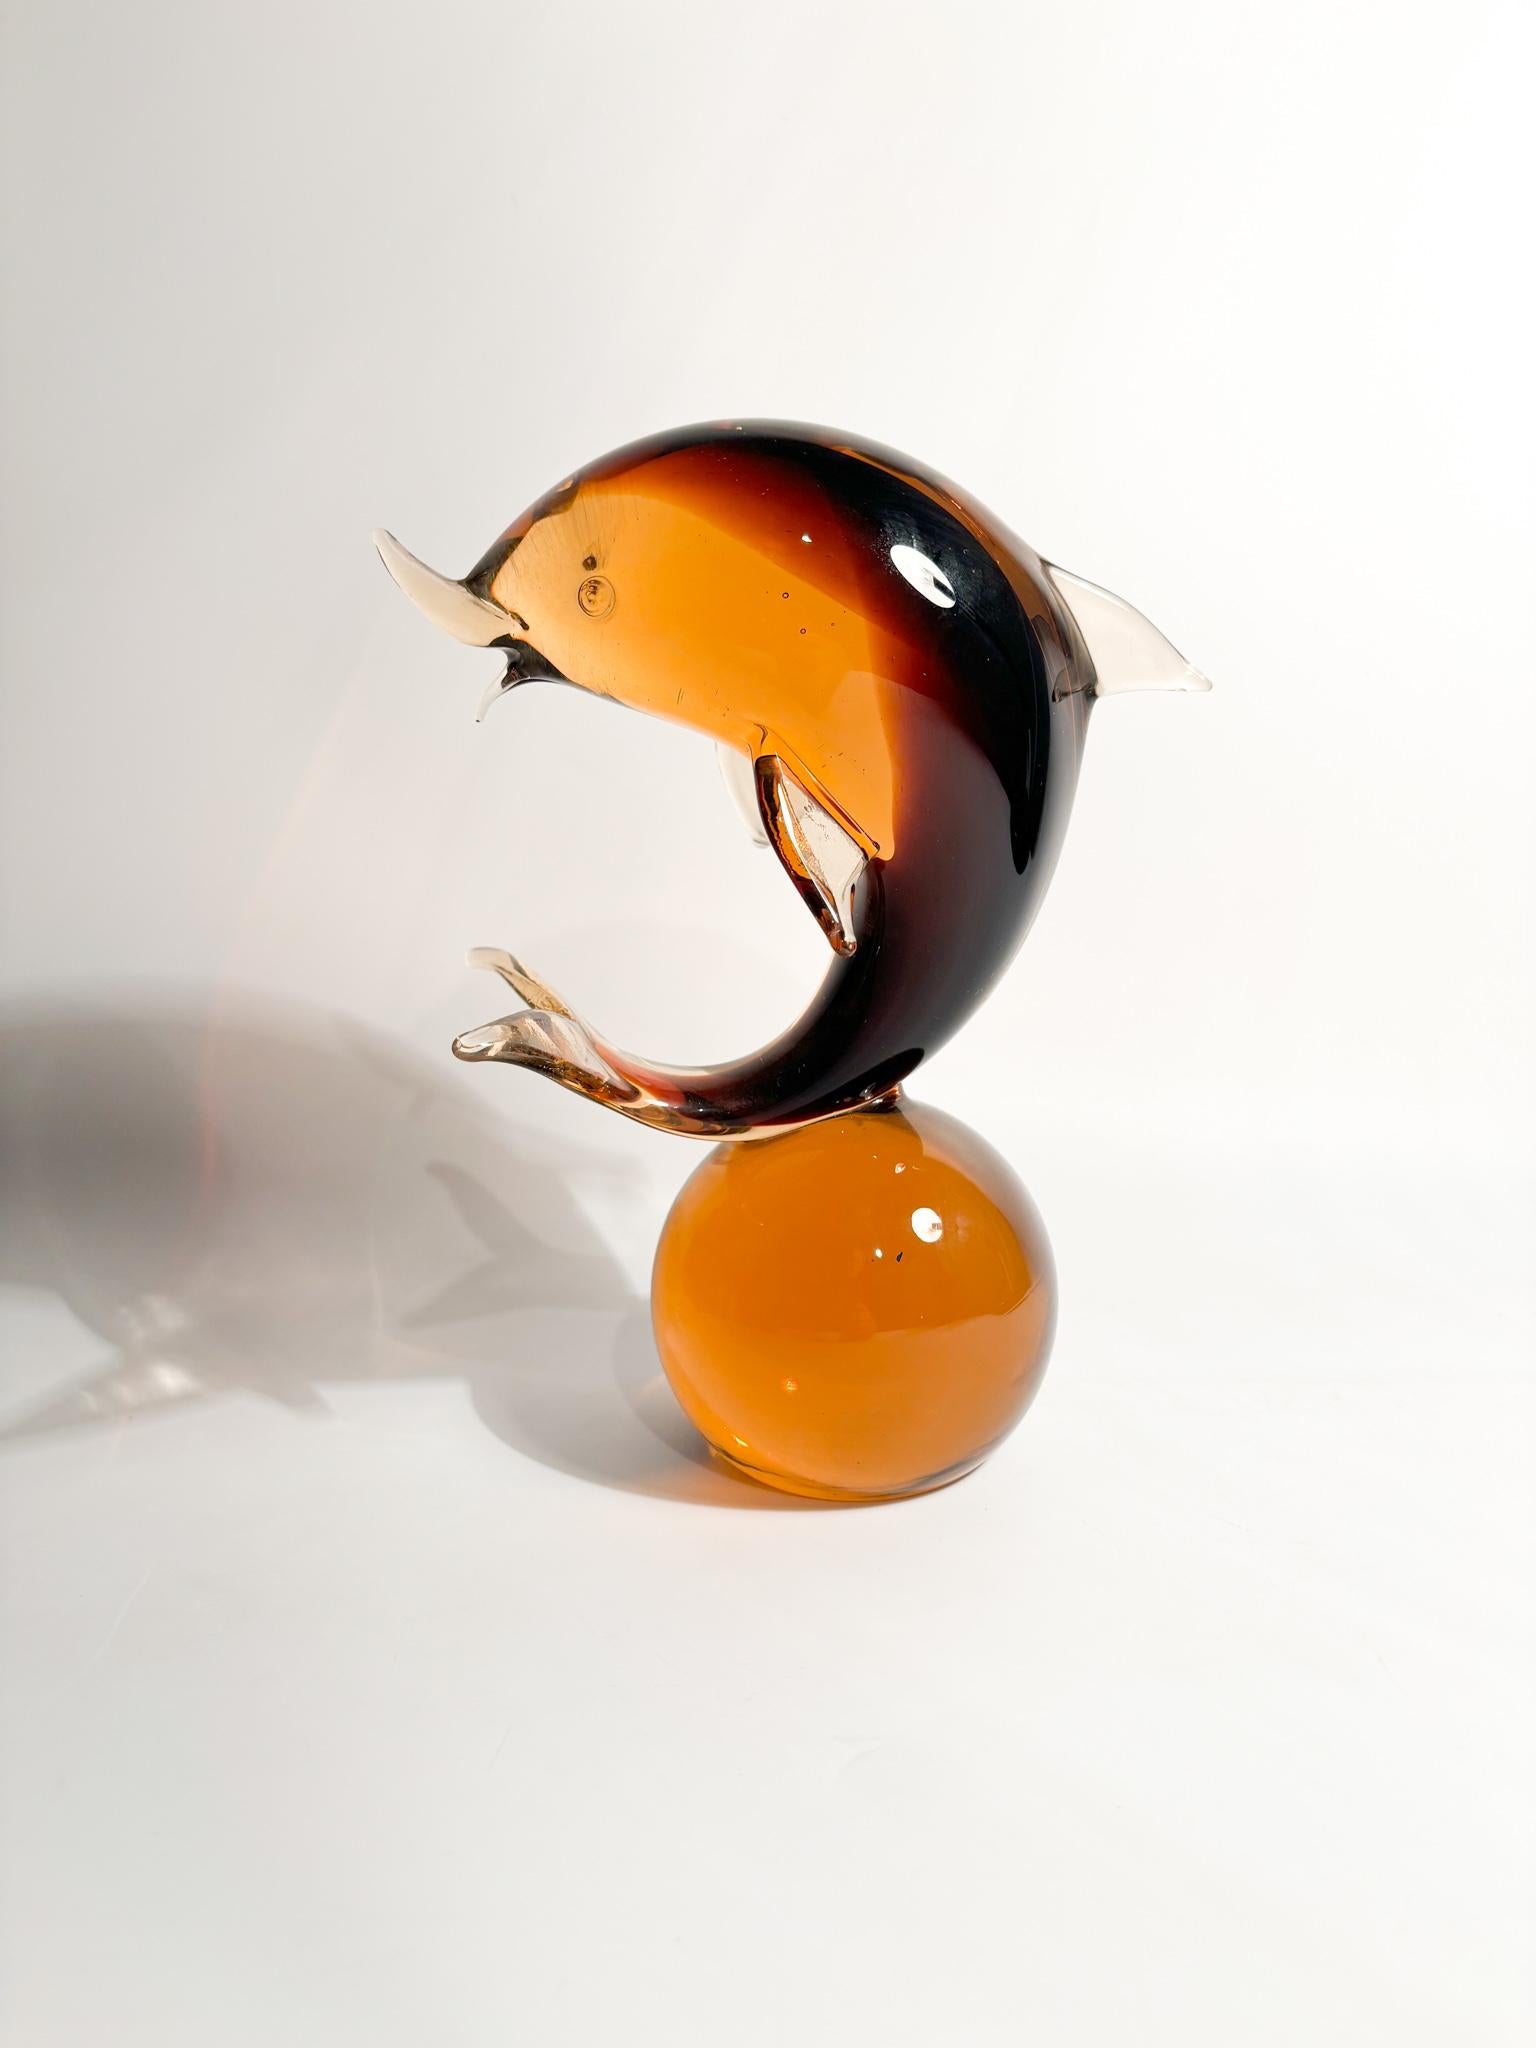 Mid-20th Century Dolphin Sculpture in Orange Murano Glass Attributed to Seguso from the 1960s For Sale